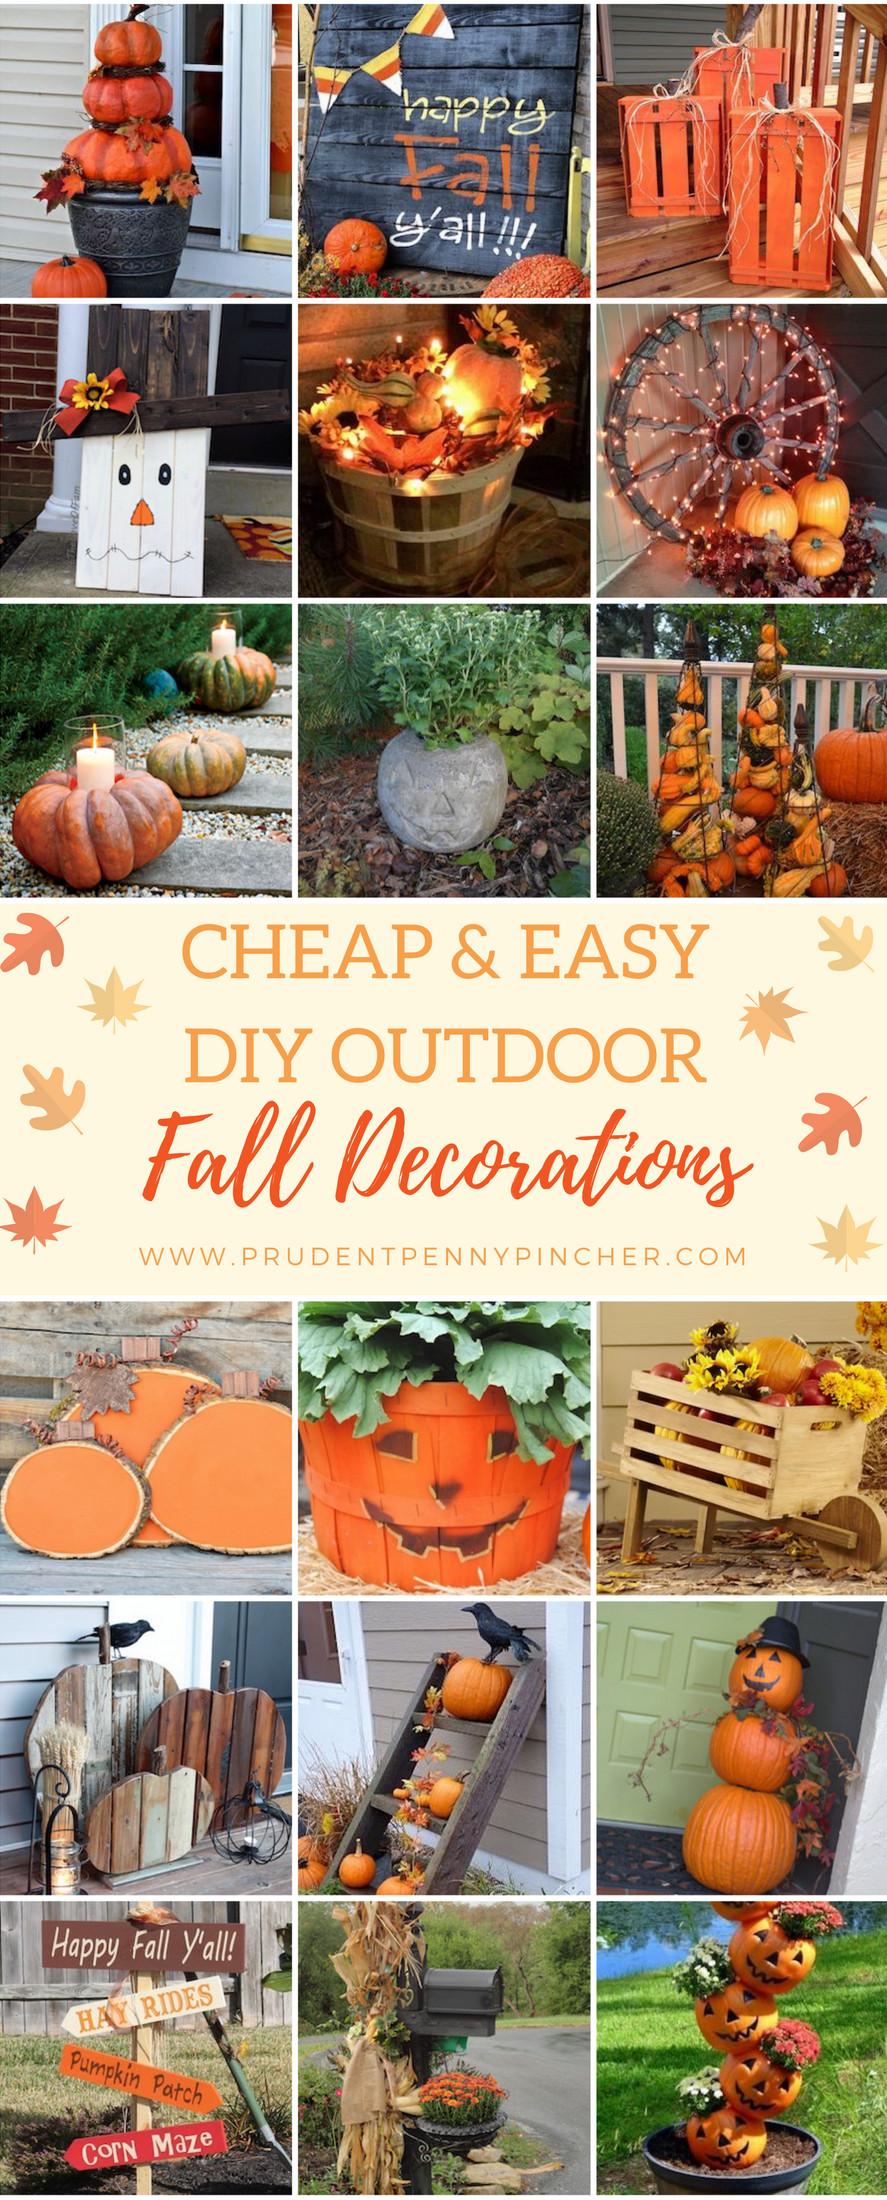 Diy Outdoor Fall Decor
 50 Cheap and Easy DIY Outdoor Fall Decorations Prudent